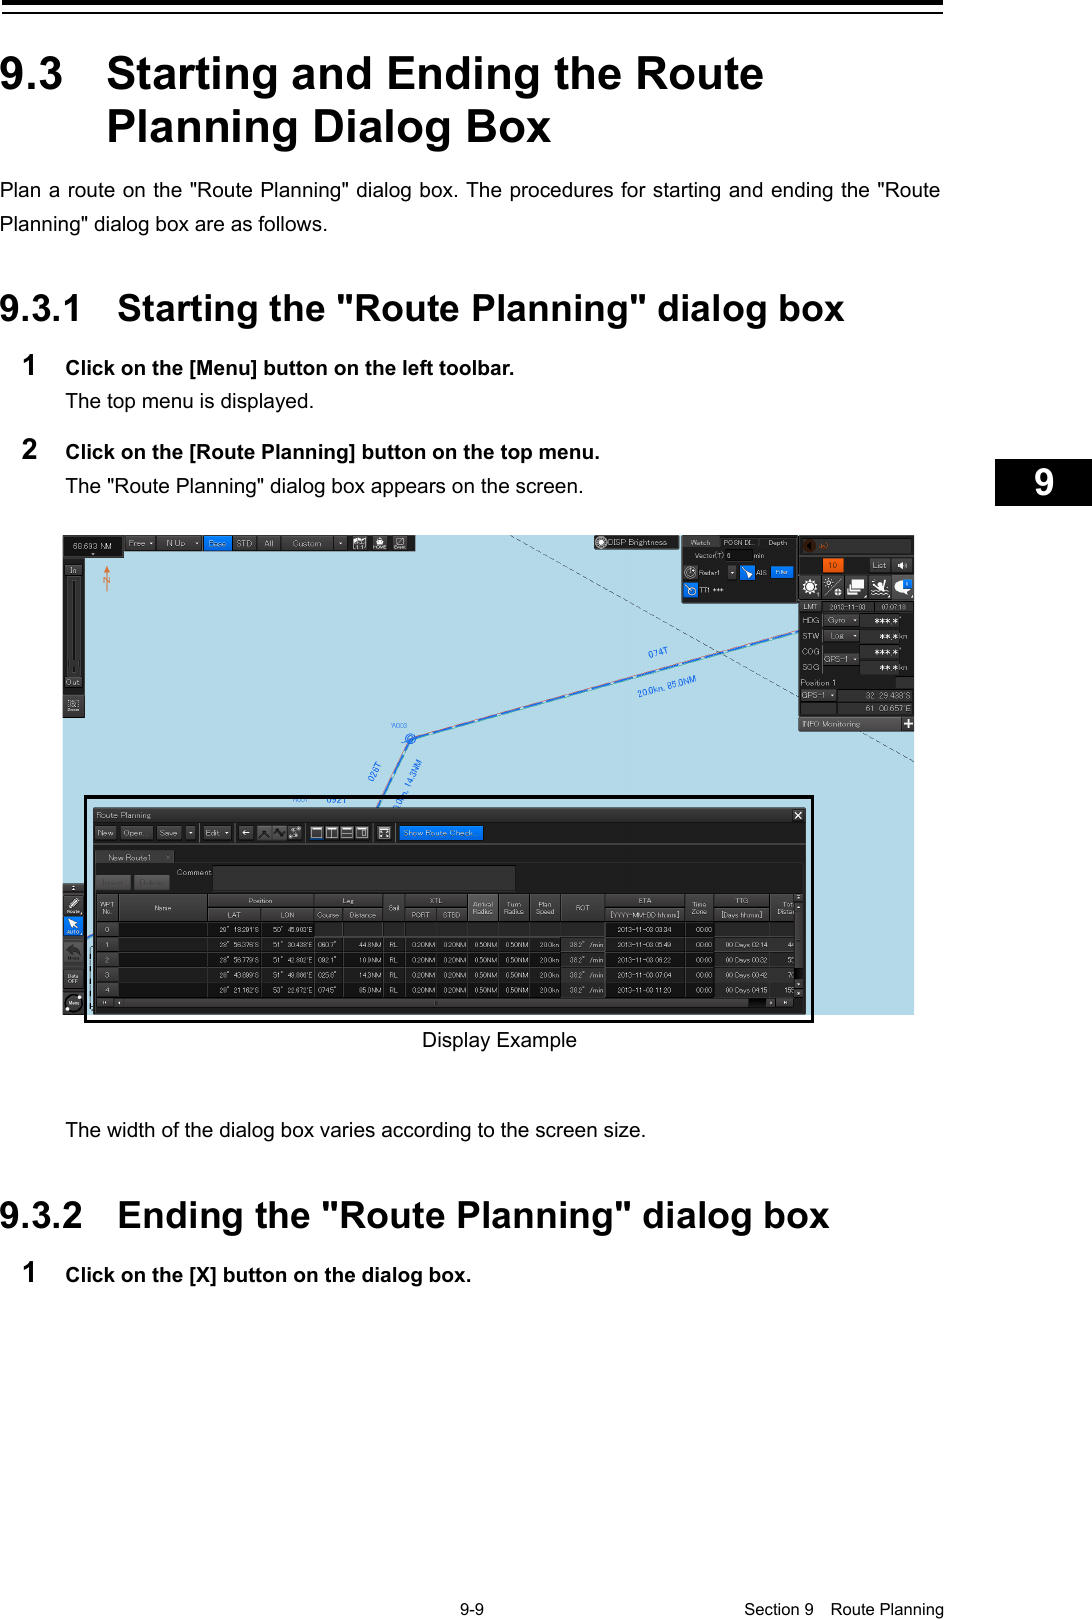    9-9  Section 9  Route Planning    1  2  3  4  5  6  7  8  9  10  11  12  13  14  15  16  17  18  19  20  21  22  23  24  25  26  27      9.3  Starting and Ending the Route Planning Dialog Box Plan a route on the &quot;Route Planning&quot; dialog box. The procedures for starting and ending the &quot;Route Planning&quot; dialog box are as follows.   9.3.1 Starting the &quot;Route Planning&quot; dialog box 1  Click on the [Menu] button on the left toolbar. The top menu is displayed. 2  Click on the [Route Planning] button on the top menu. The &quot;Route Planning&quot; dialog box appears on the screen.    The width of the dialog box varies according to the screen size.   9.3.2 Ending the &quot;Route Planning&quot; dialog box 1  Click on the [X] button on the dialog box.    Display Example  